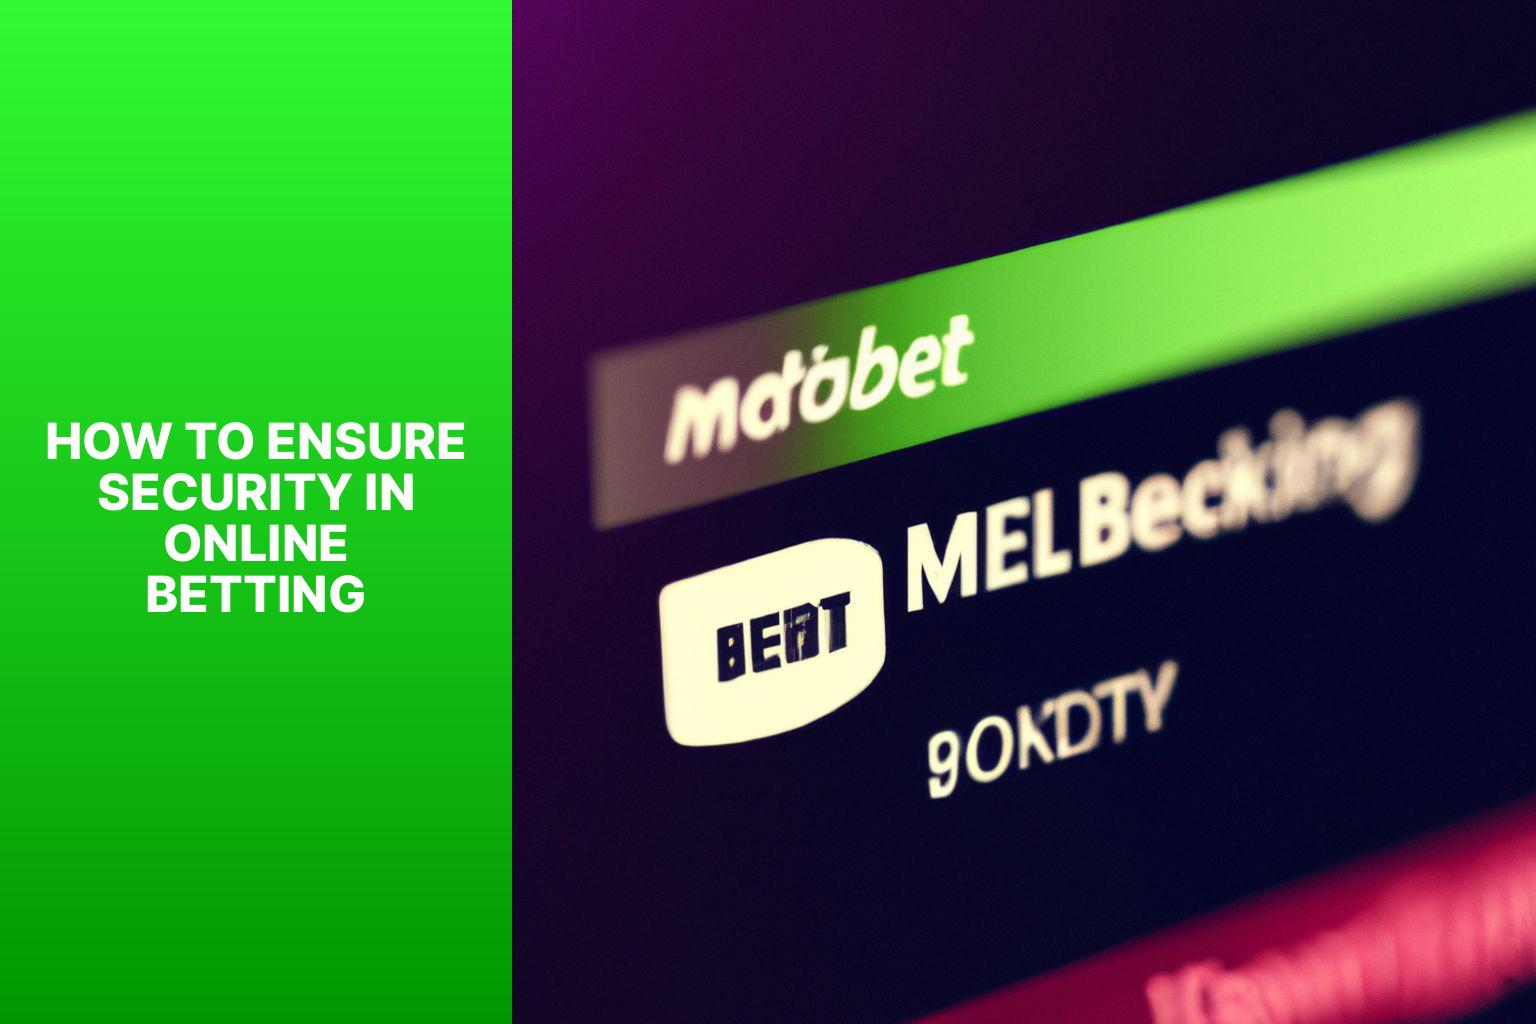 How to Ensure Security in Online Betting - Is MelBet Safe? Ensuring Security in Online Betting 